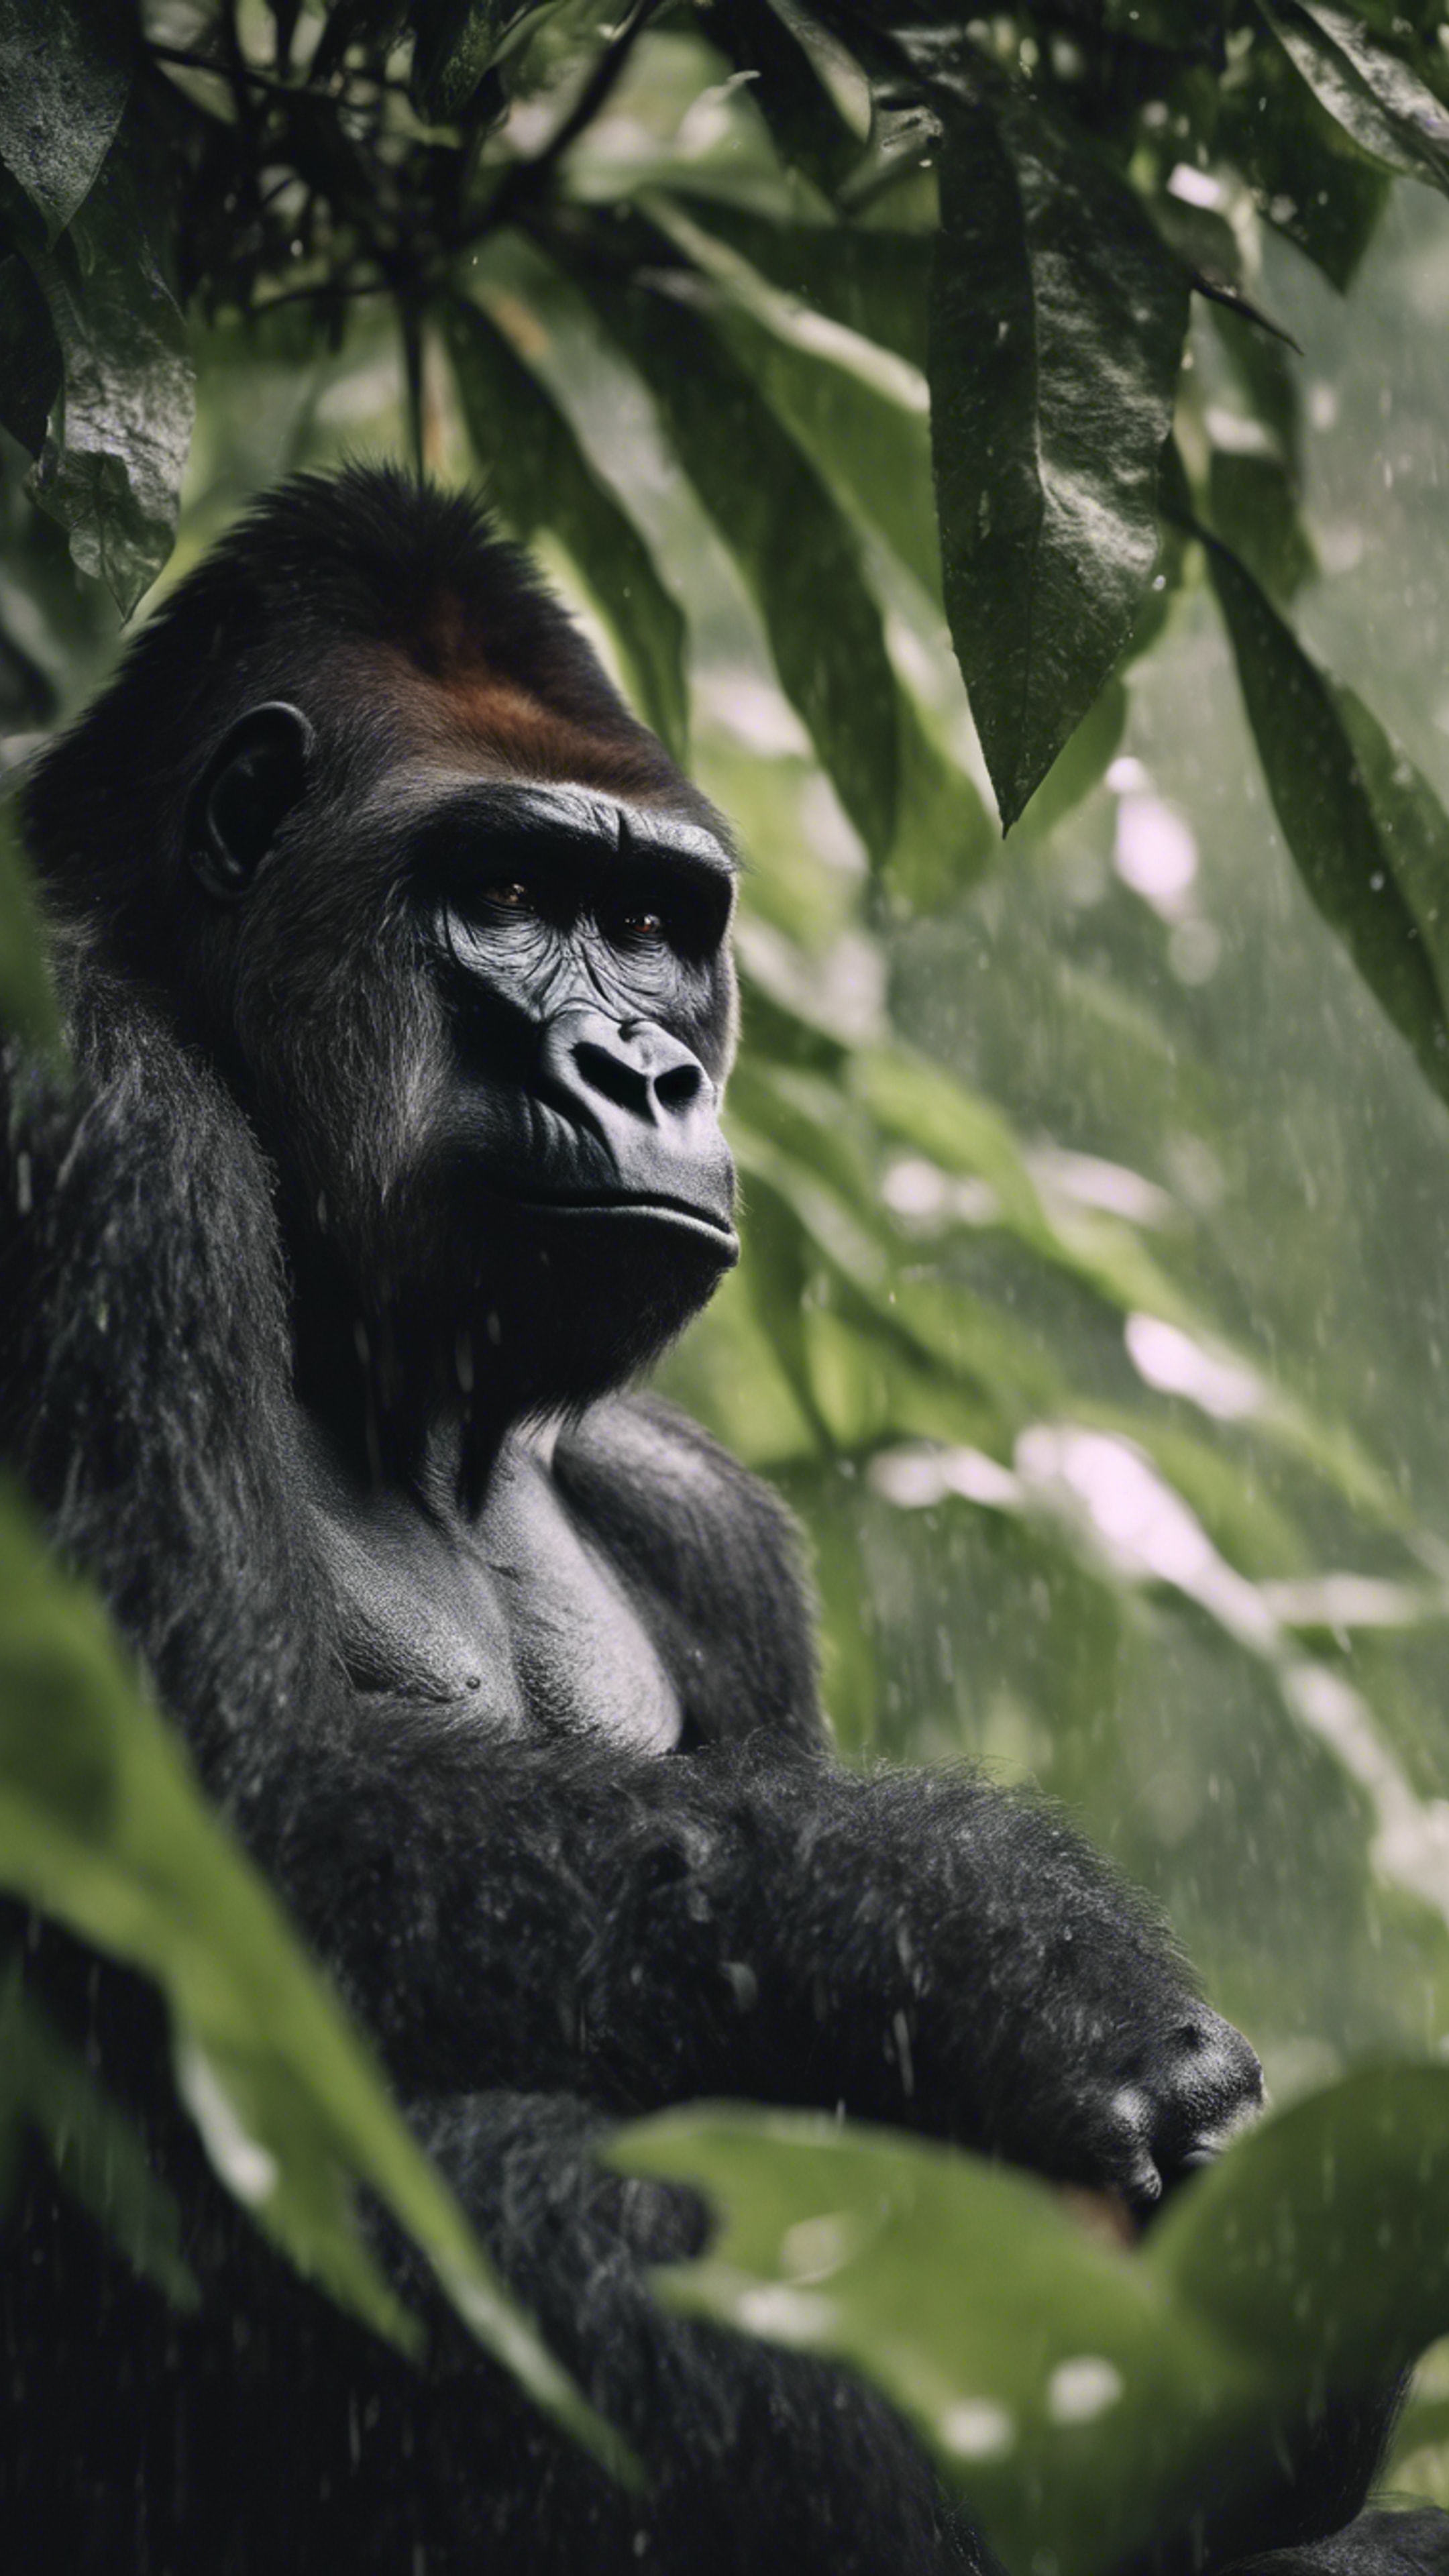 A sad gorilla on a rainy day, gazing out from under the shelter of giant leaves. Hintergrund[ce7c66a51f504b8e8f6d]